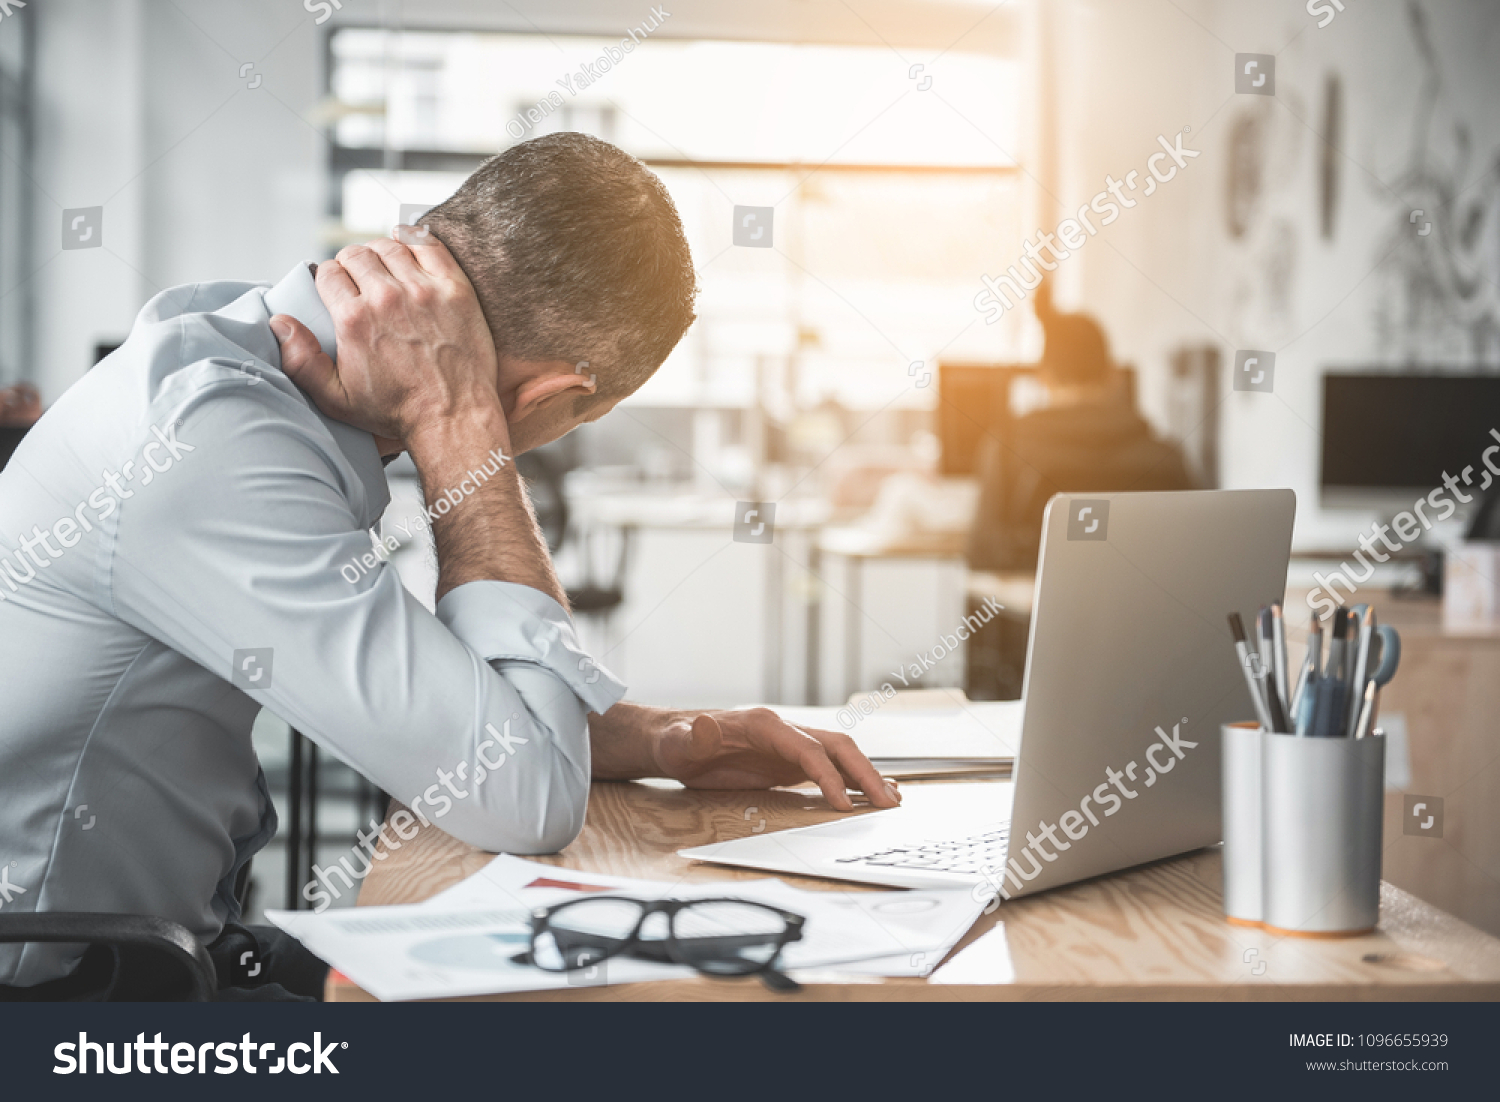 Man holding sore neck while using notebook computer. He sitting at table. Sick worker concept #1096655939